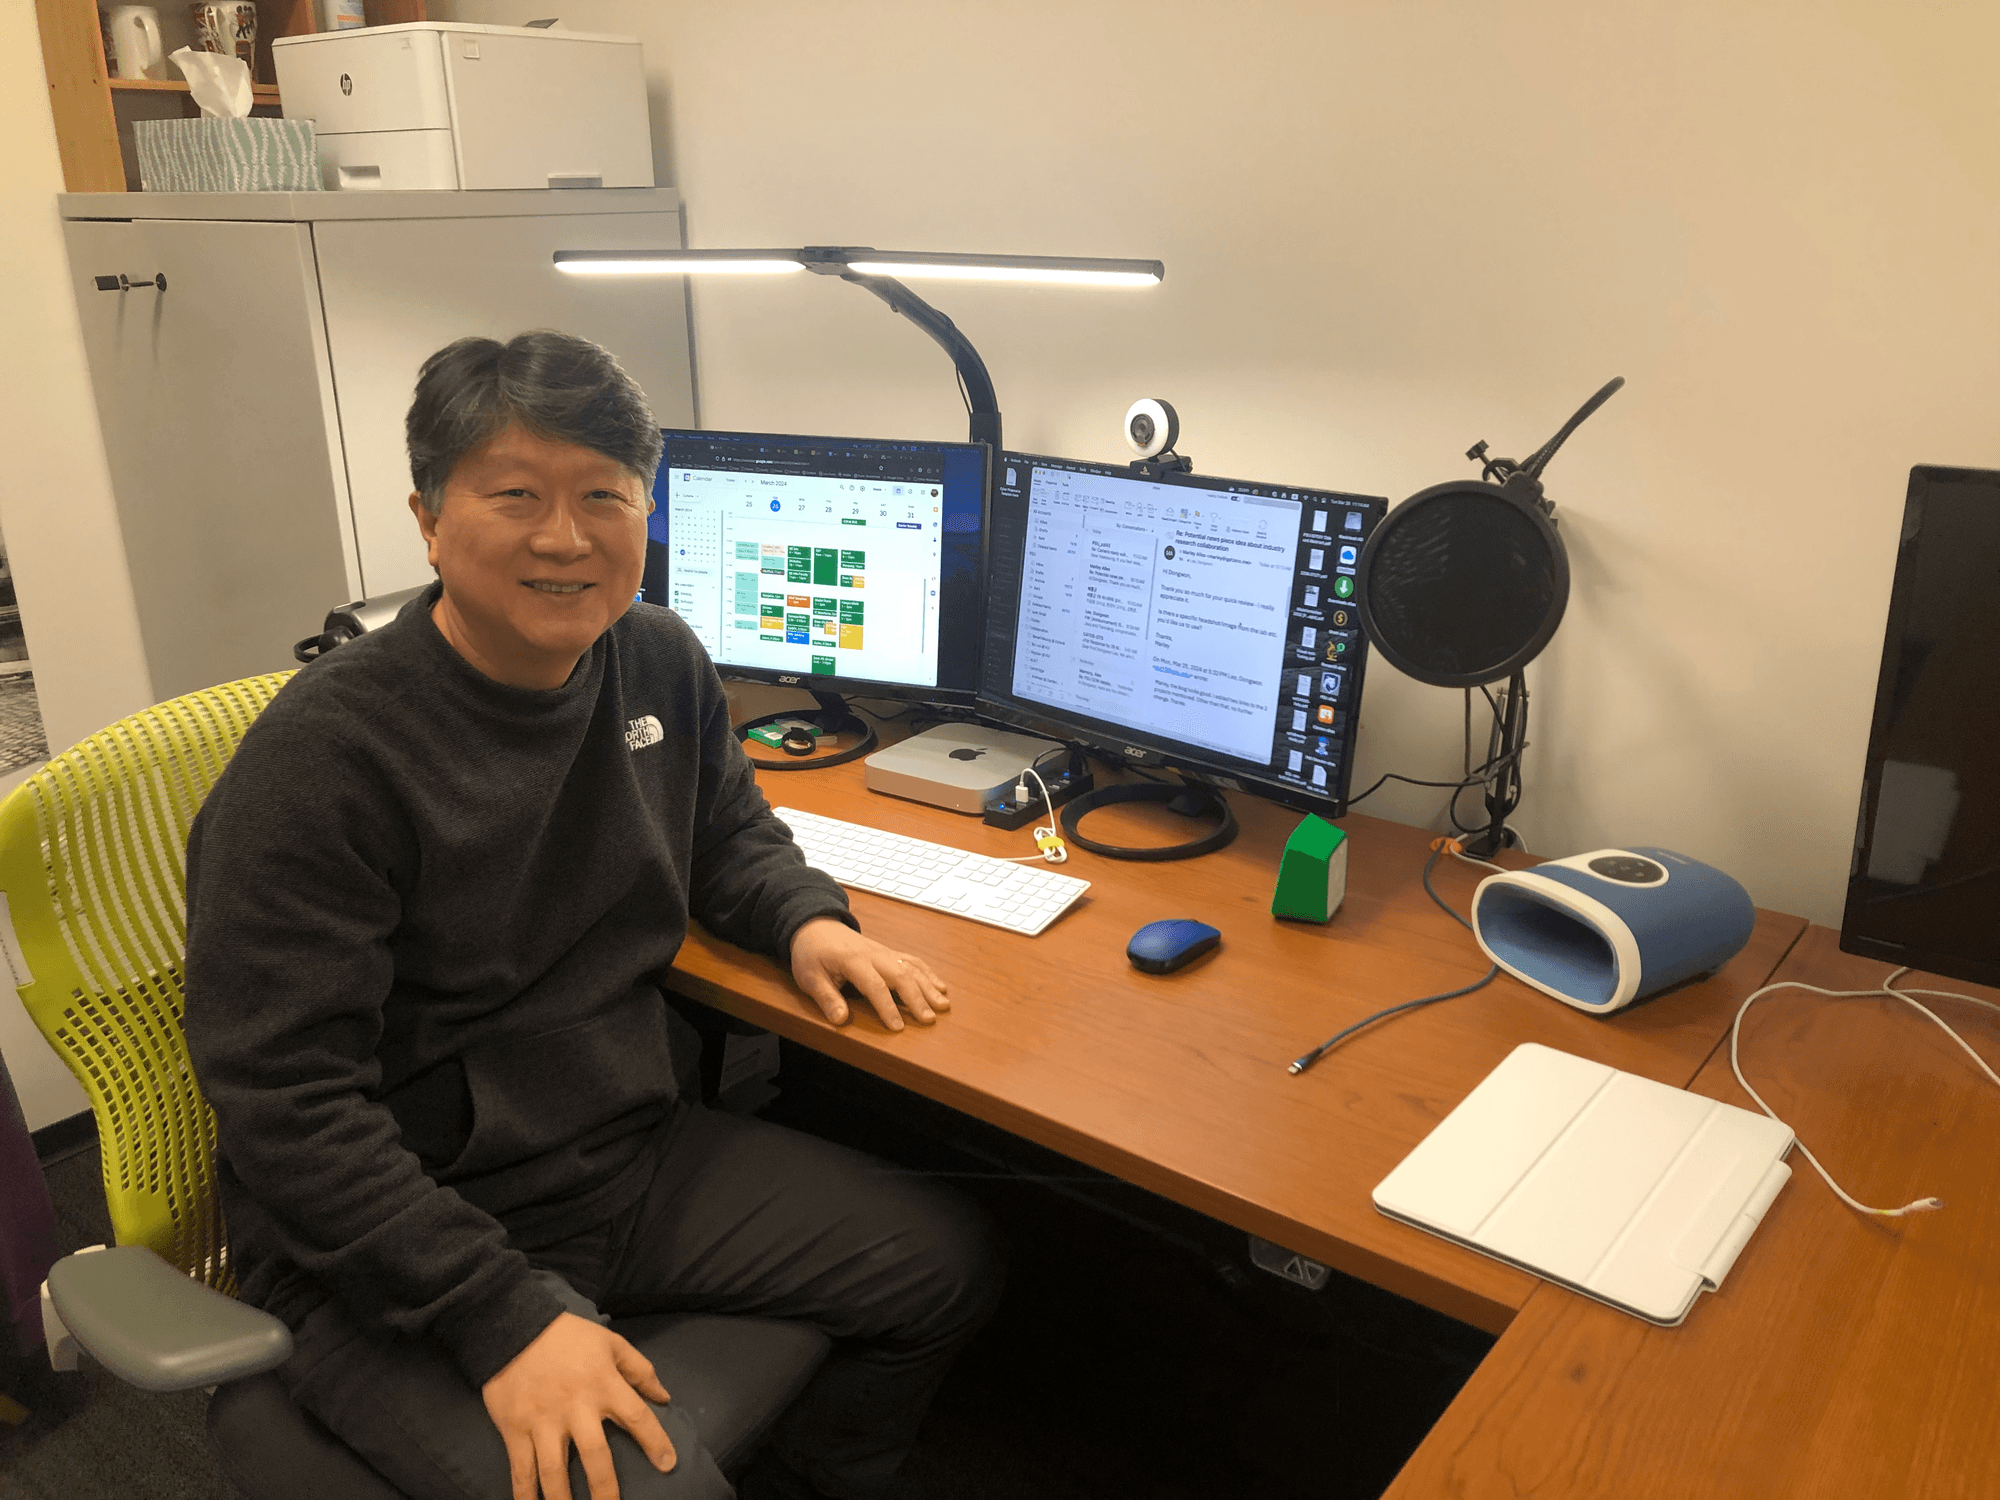 GPTZero welcomes Dr. Dongwon Lee, commits to standard benchmarks in AI detection image